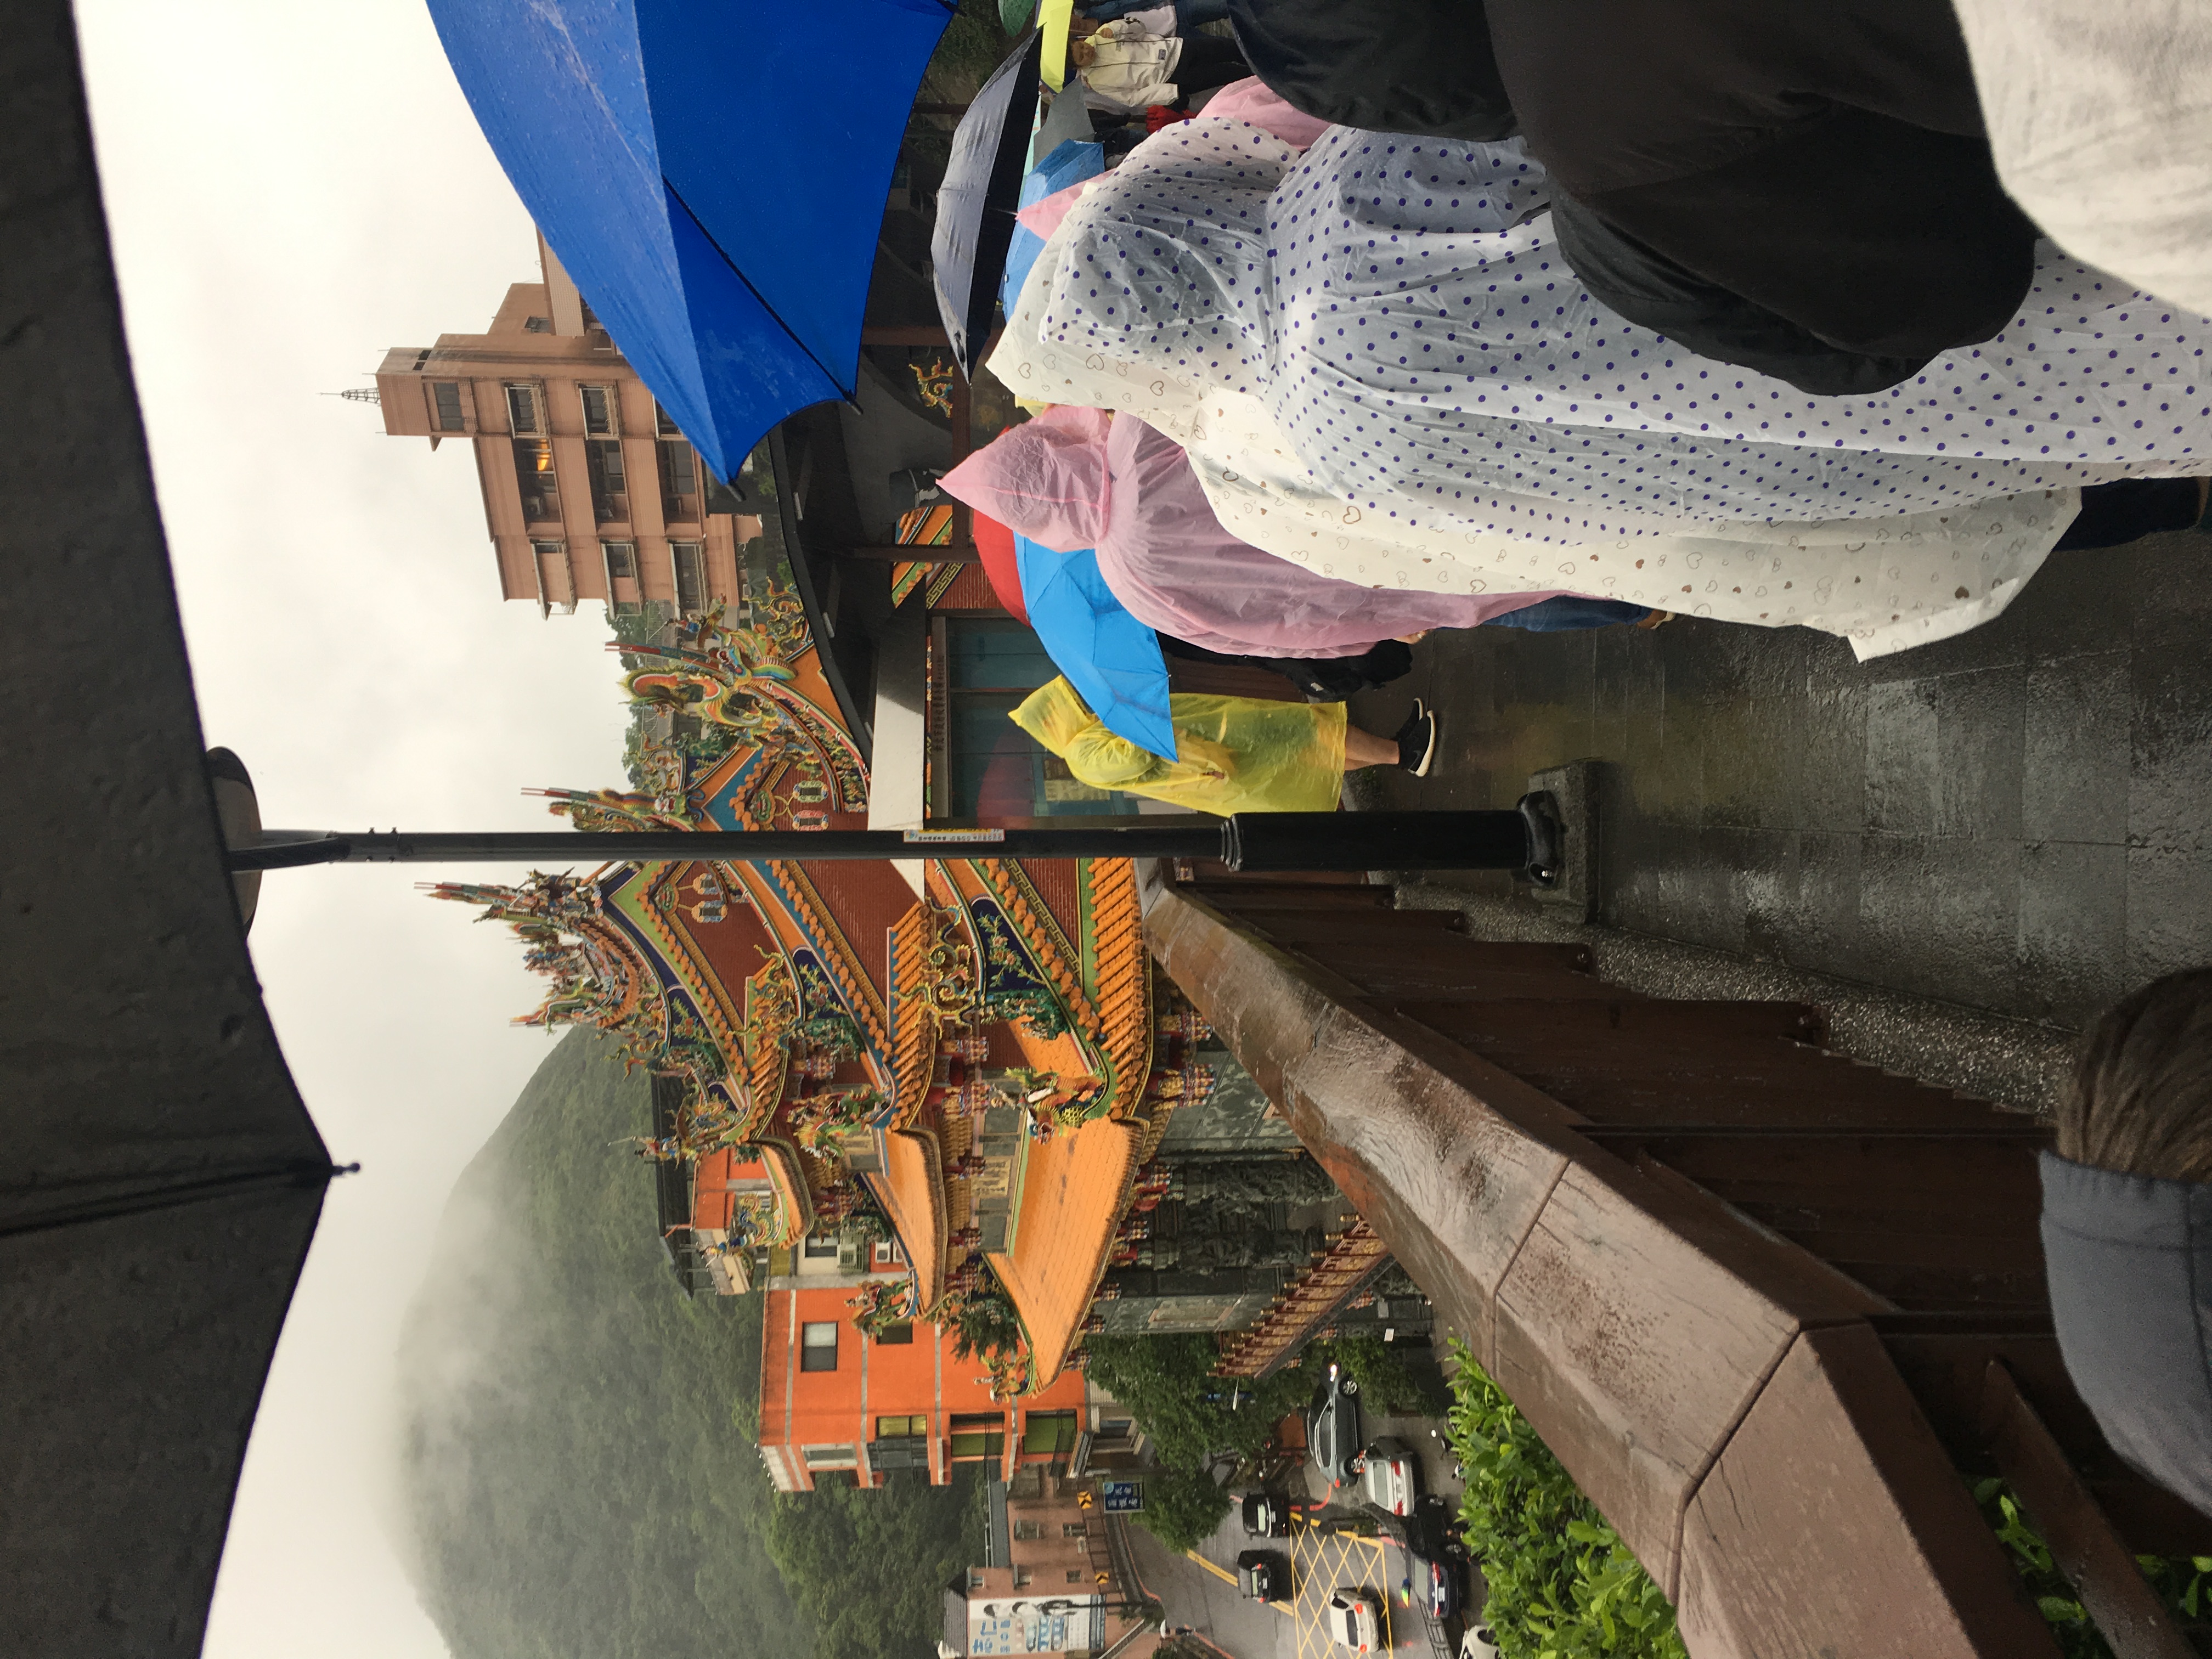 waiting in line with a bunch of poncho-clad tourists, under cloudy skies, in front of a temple